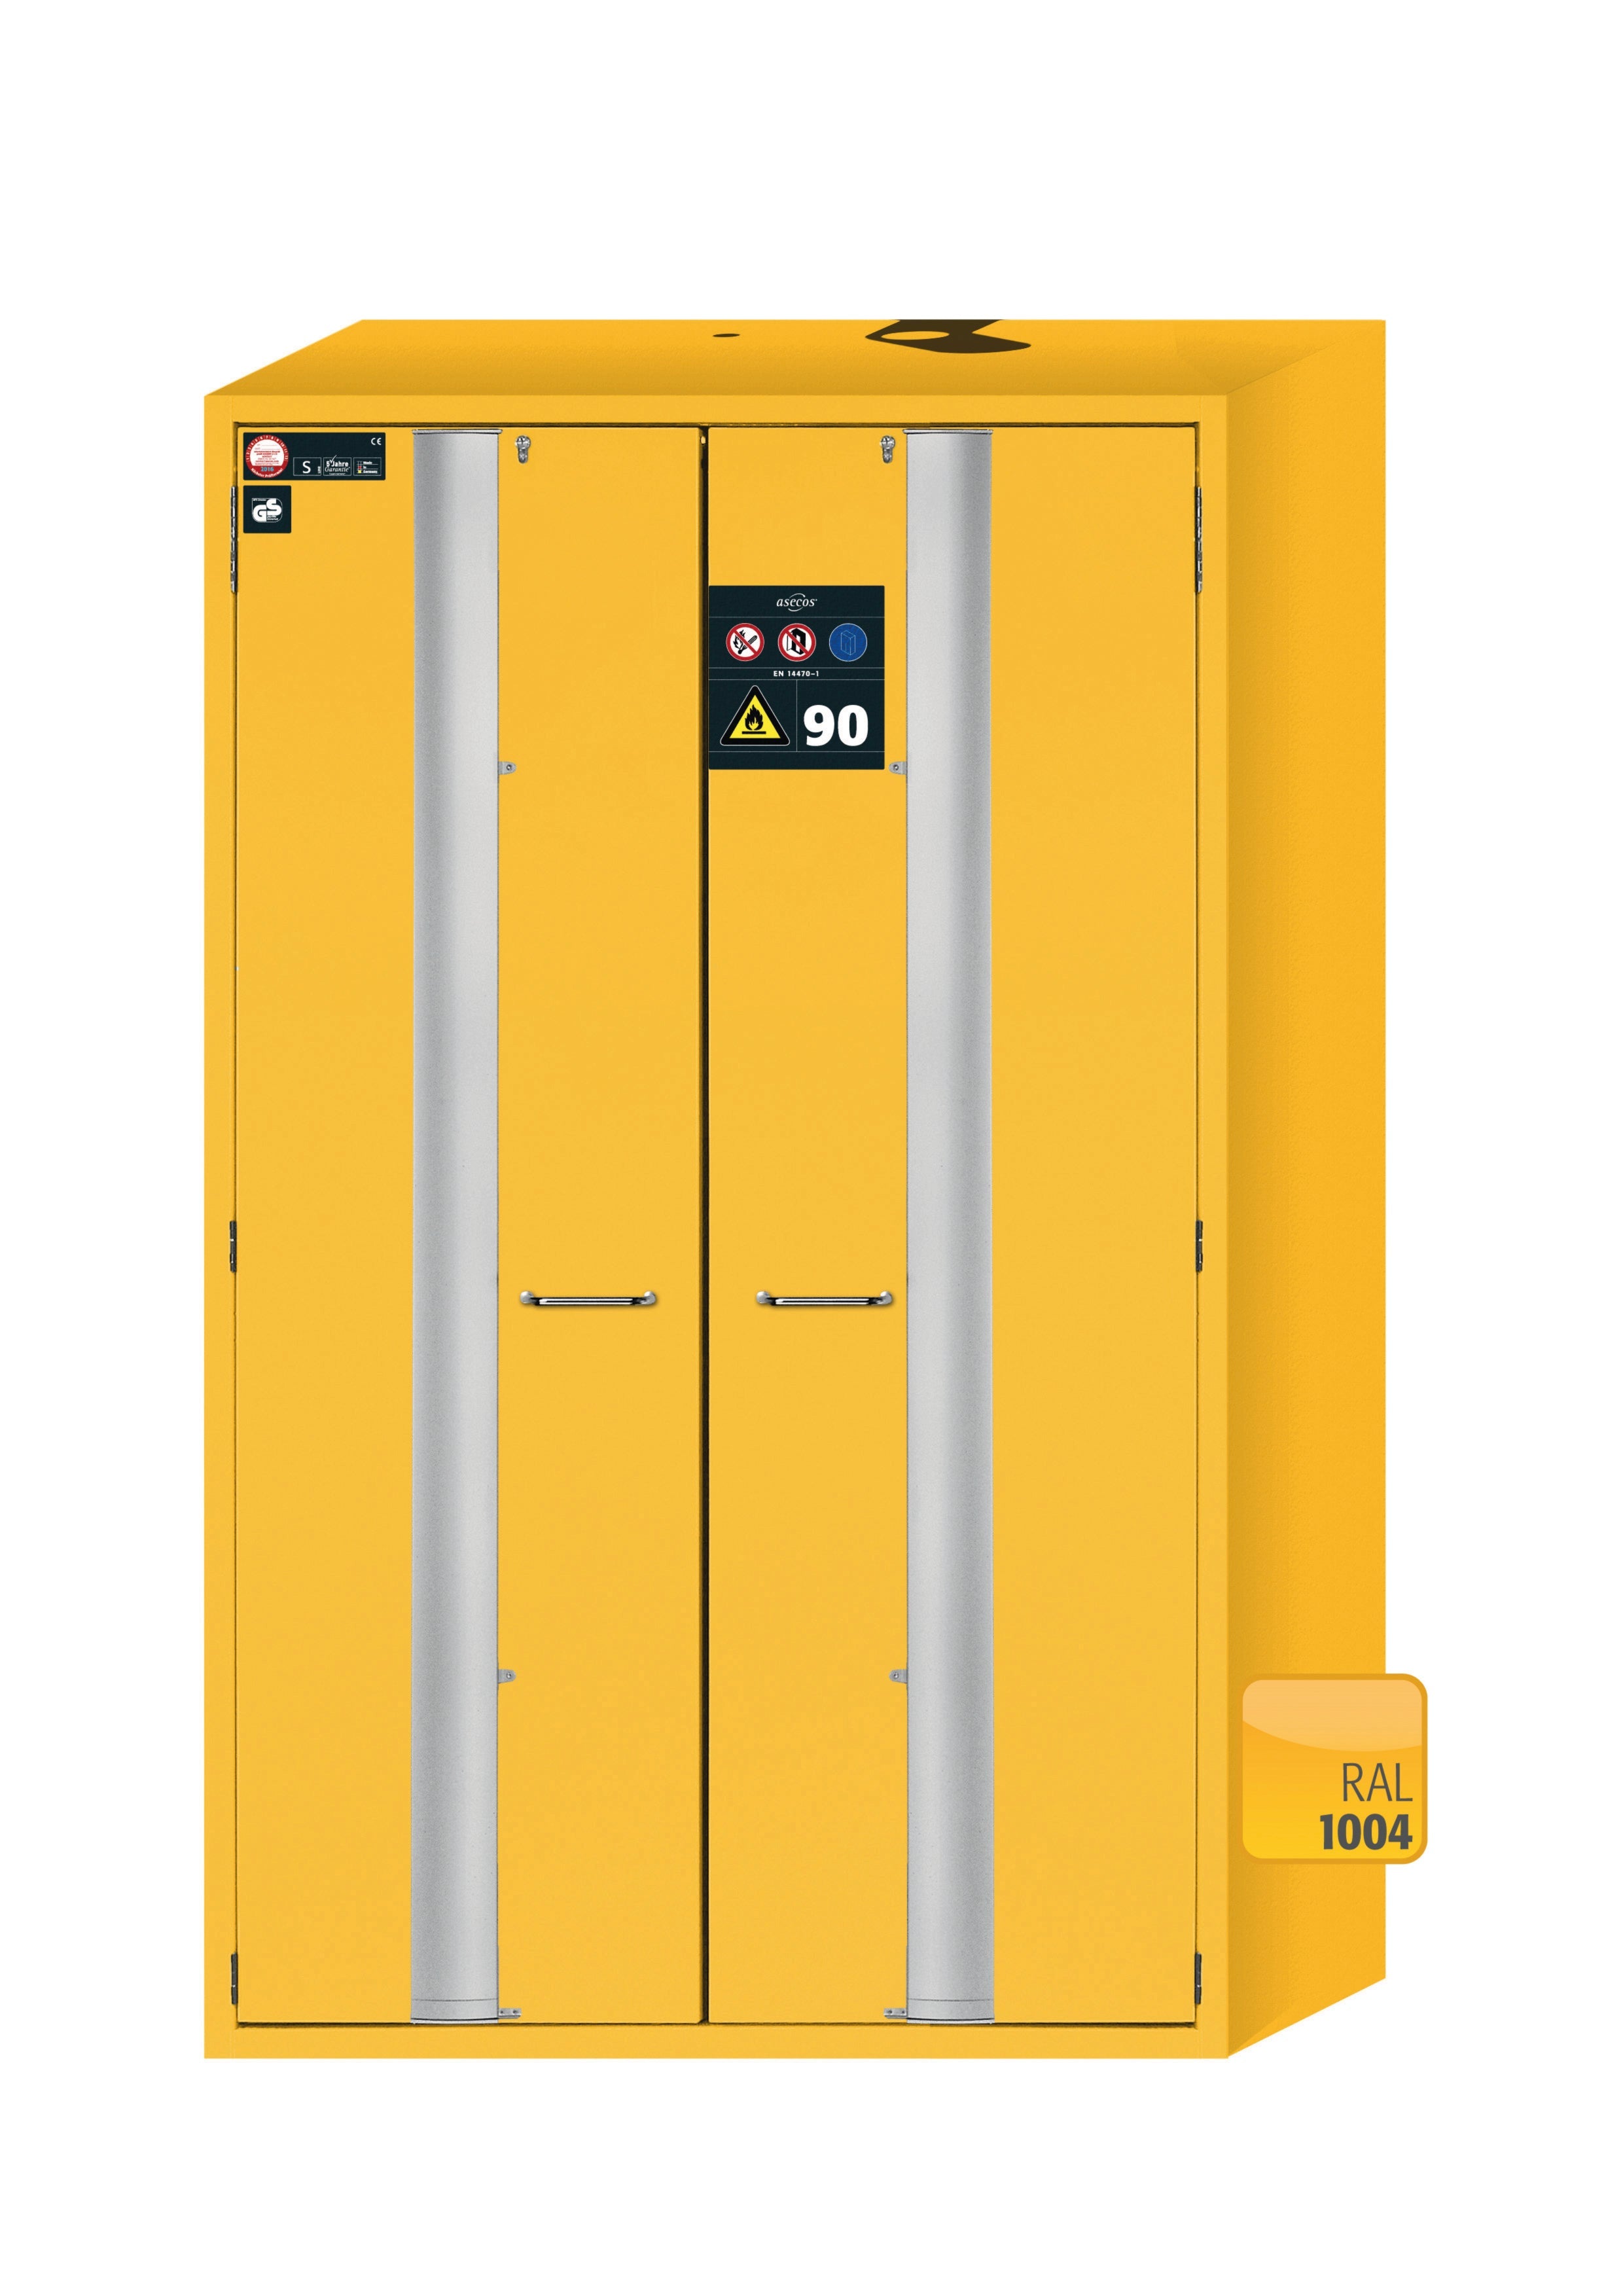 Type 90 safety storage cabinet S-PHOENIX-90 model S90.196.120.FDAS in warning yellow RAL 1004 with 3x drawer (standard) (sheet steel),